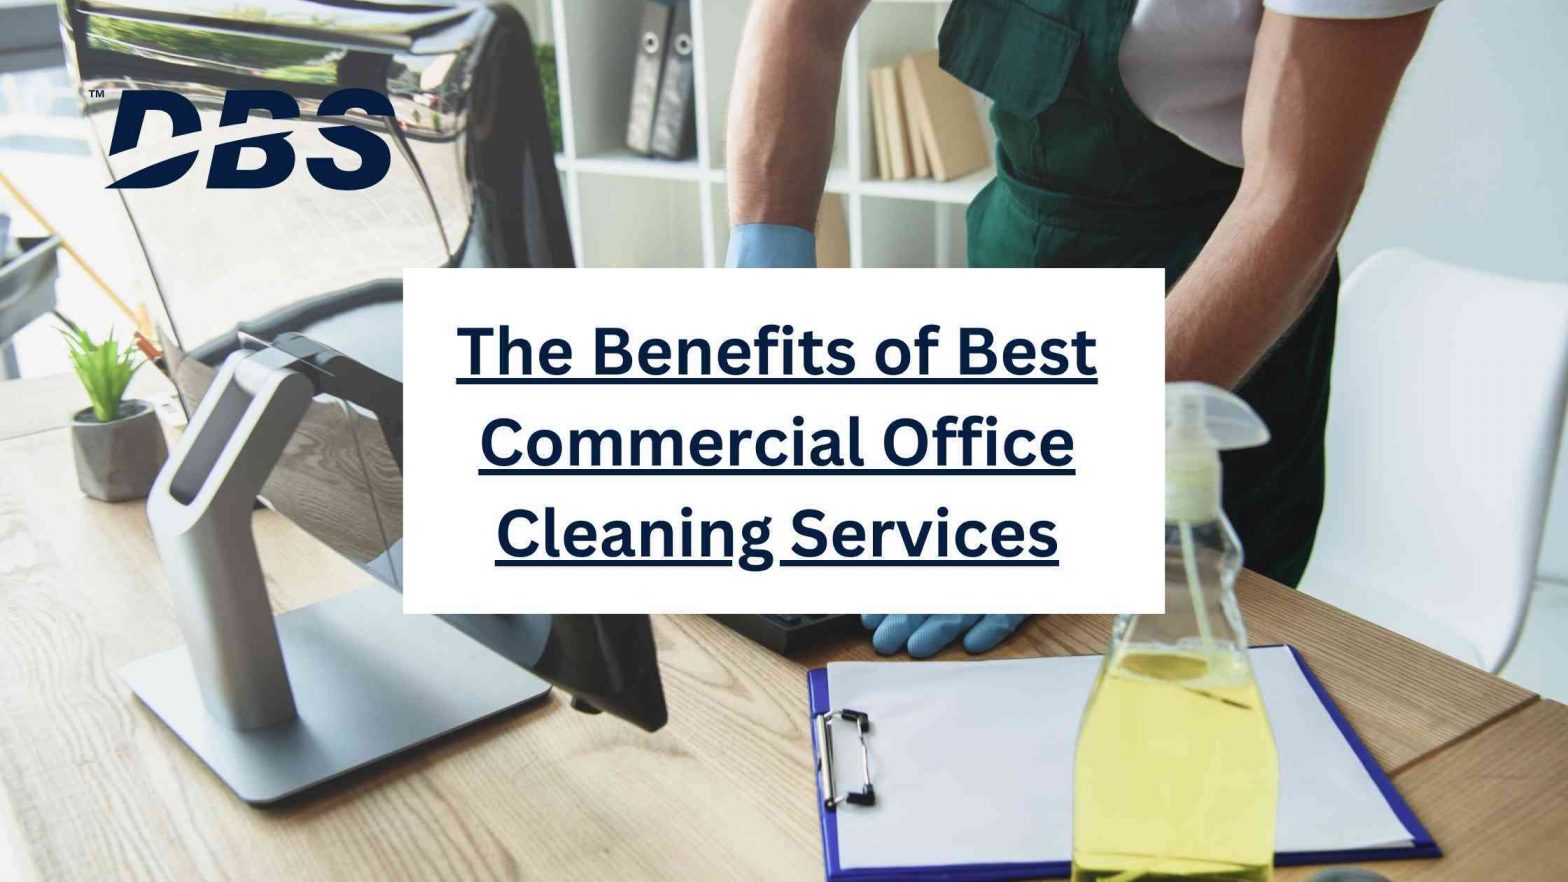 Best Commercial Office Cleaning Services